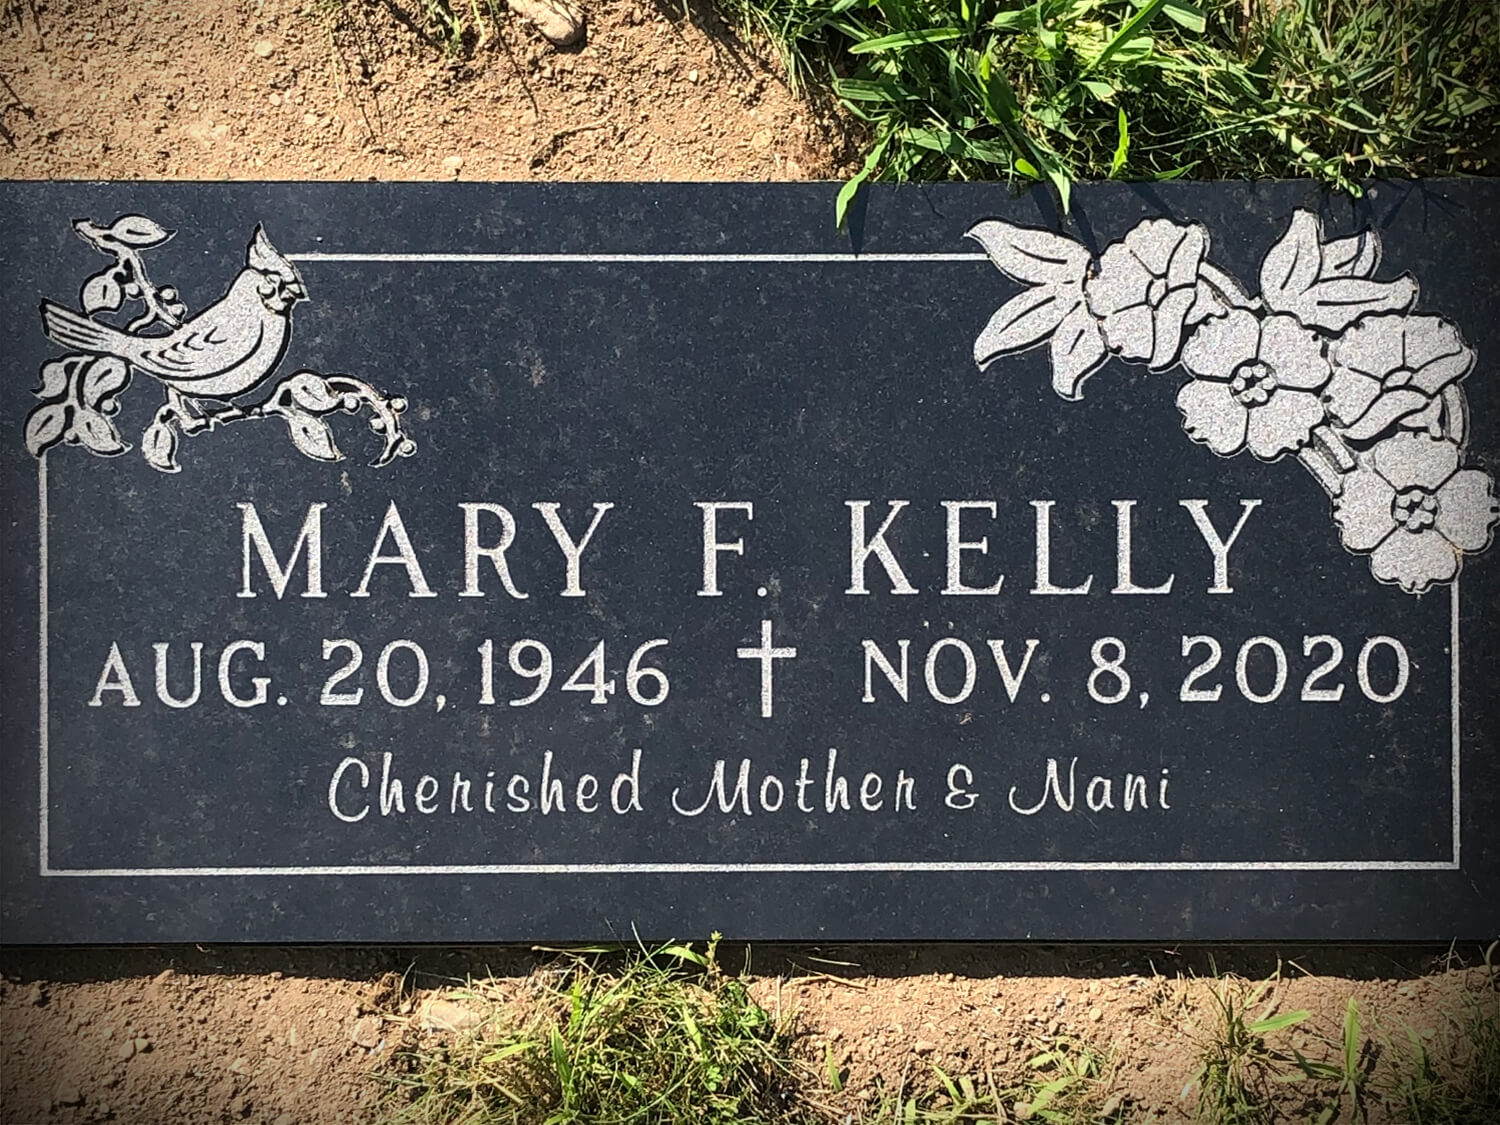 Polished Black Granite Flat Marker Kelly Tribute Cardinal and Flower Carvings